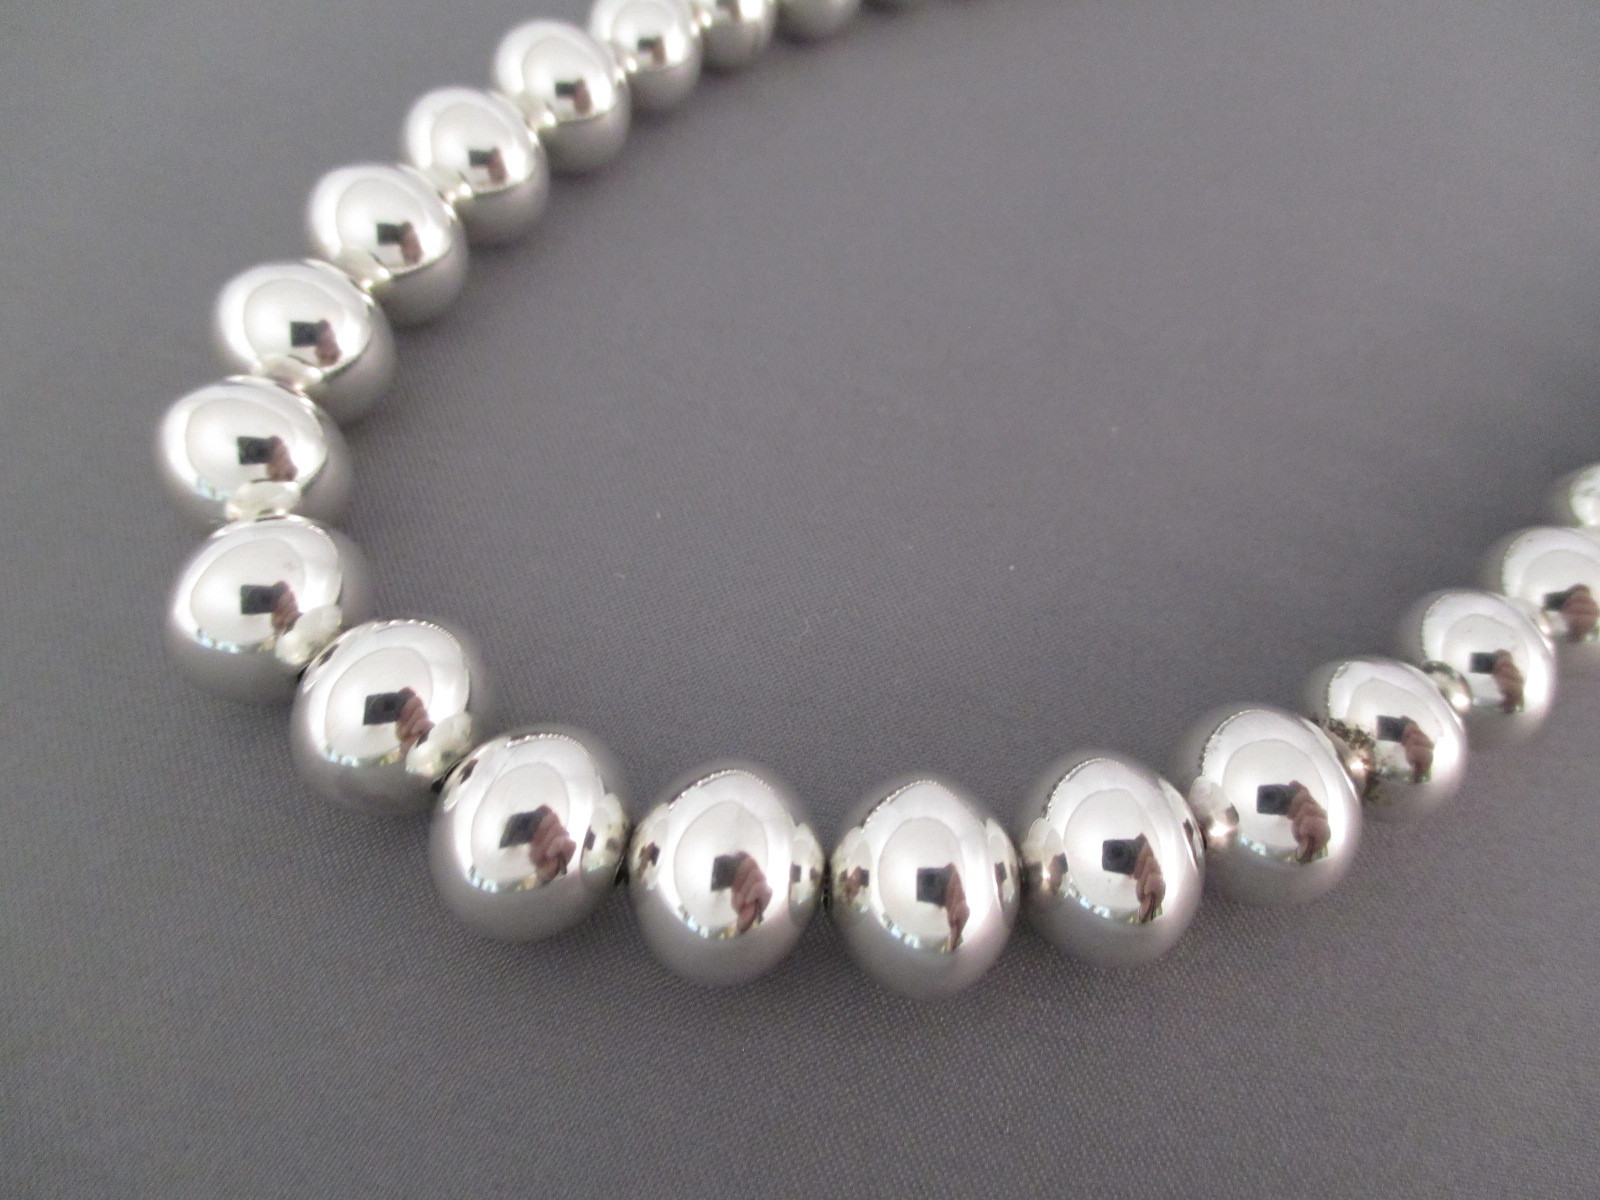 Silver Bead Necklace
 Short Sterling Silver Bead Necklace